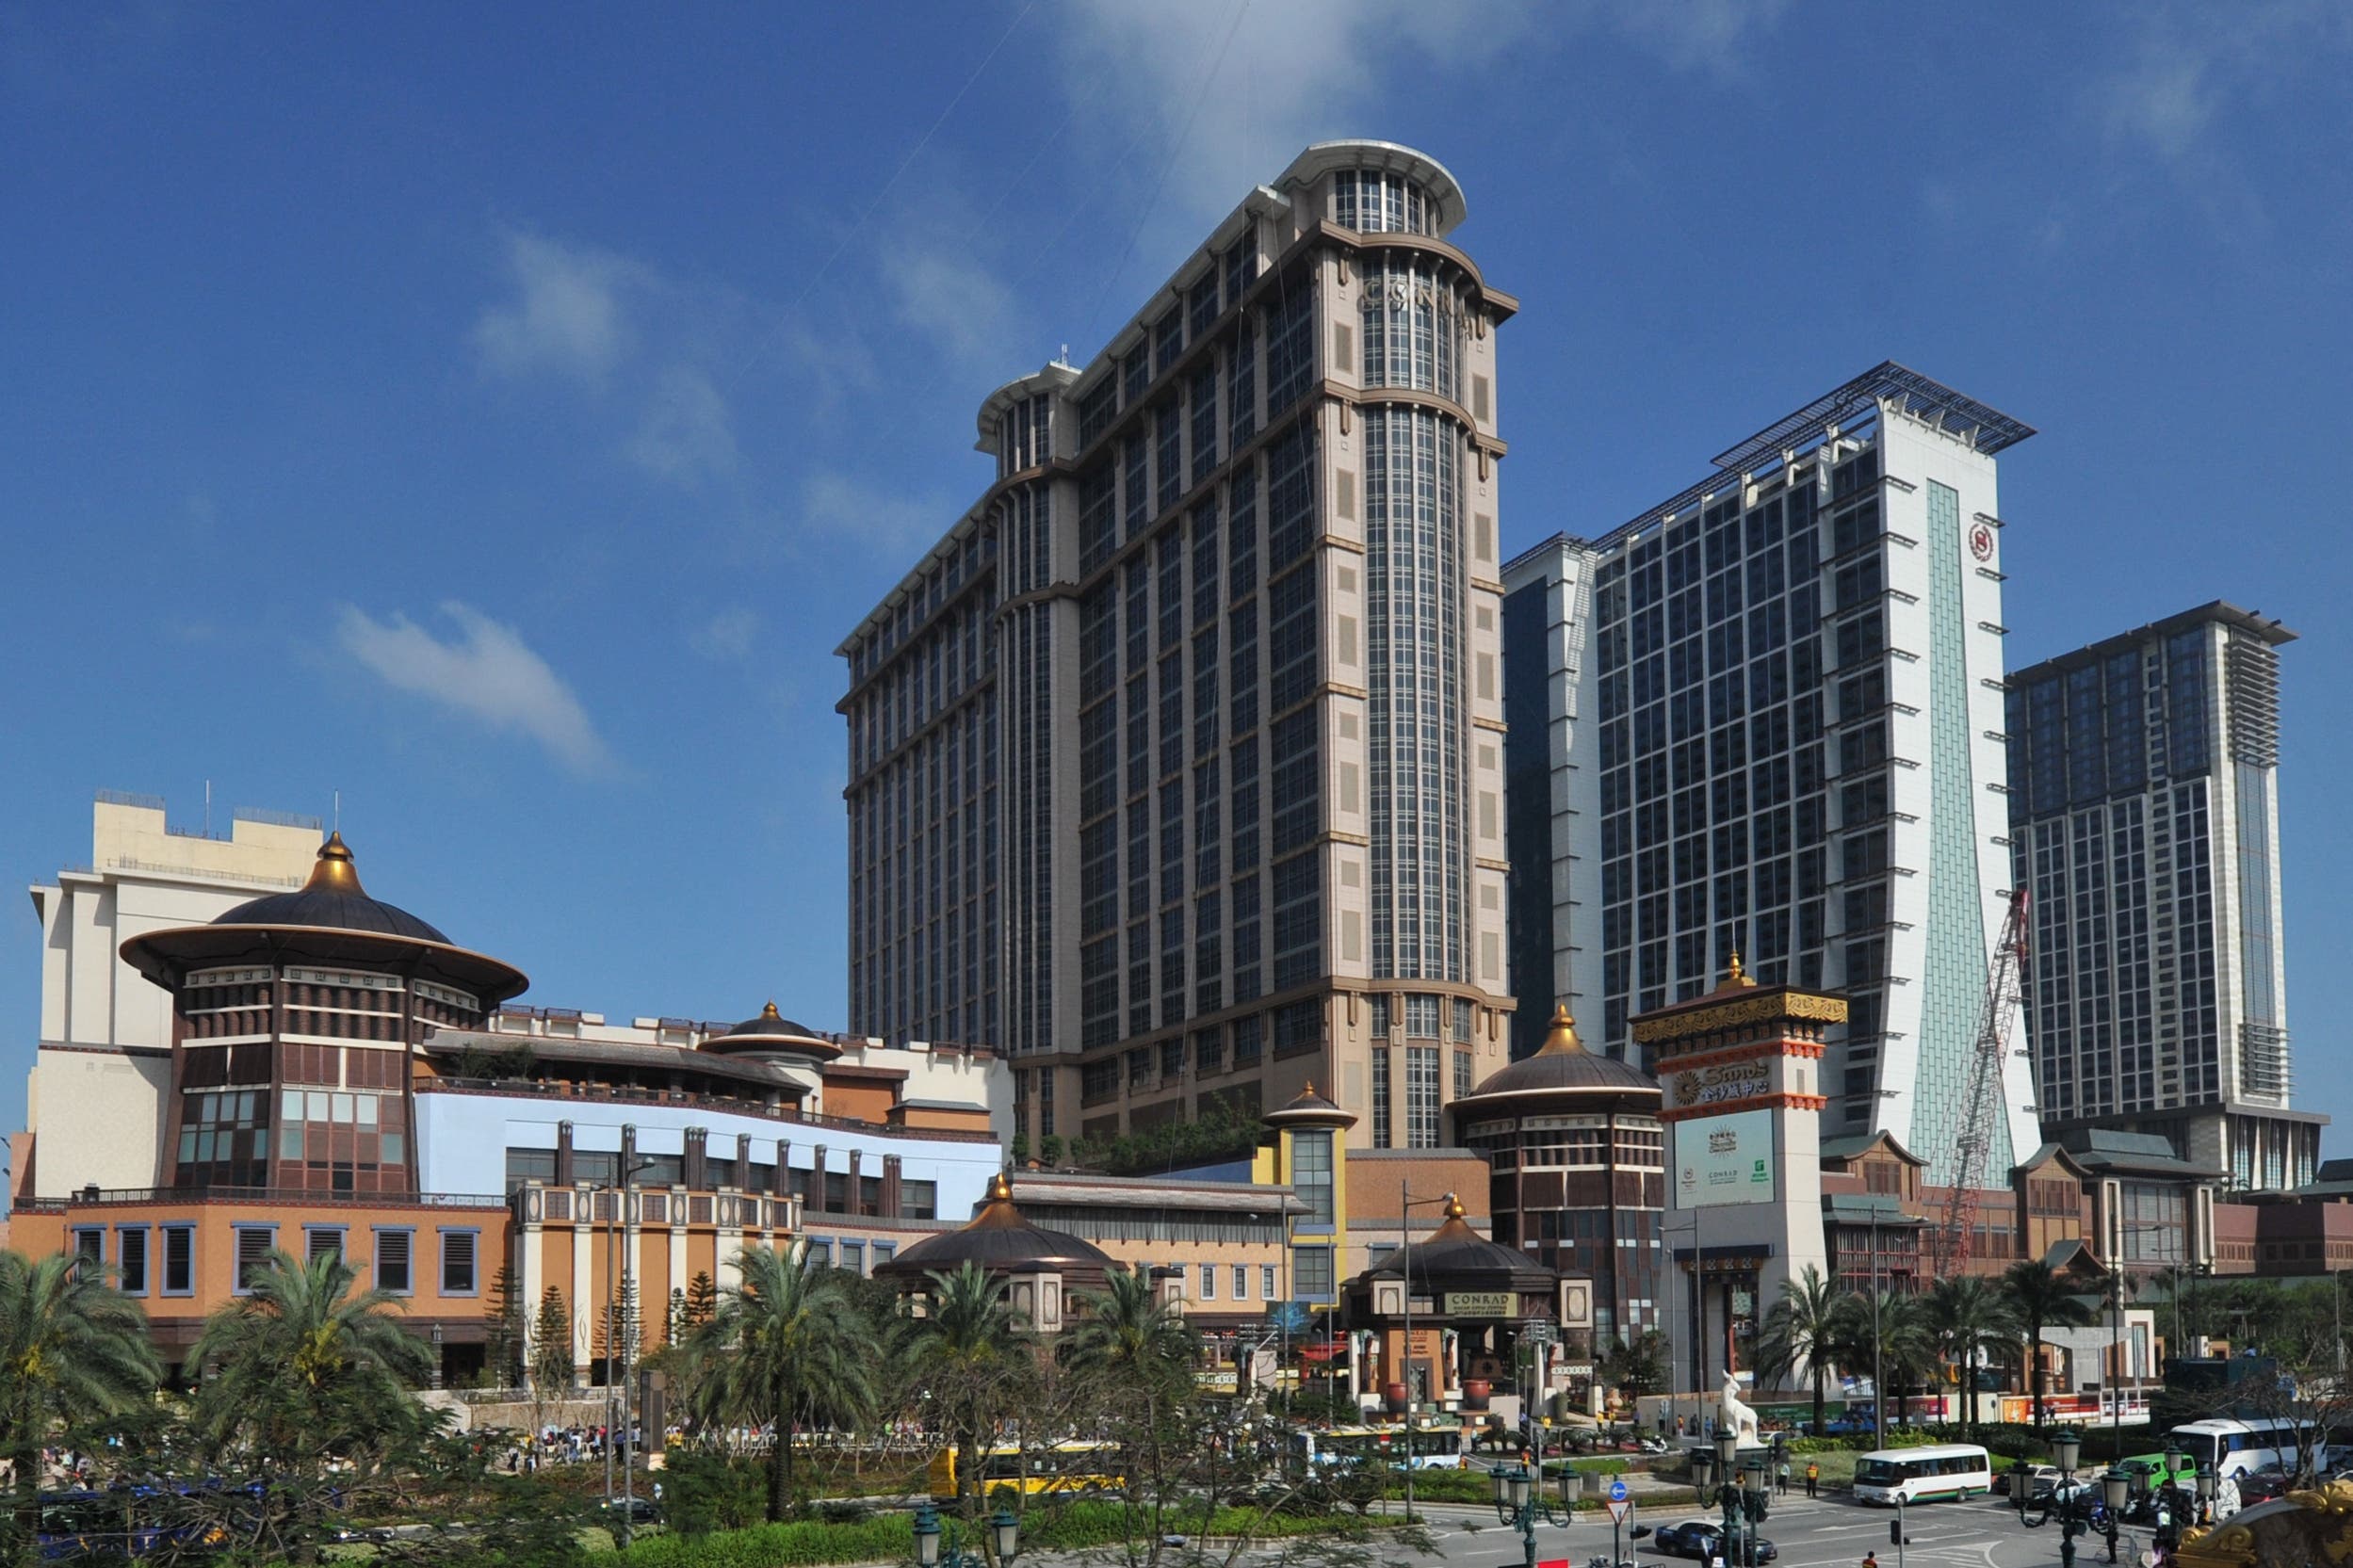 The Sands Cotai Central is seen before the opening of the resort in Macau on April 11, 2012. Las Vegas Sands Corp. opened its fourth casino in the booming Asian gaming capital of Macau transforming a swamp earmarked for a fireworks factory into a $5 billion resort. (FIle photo: AFP)